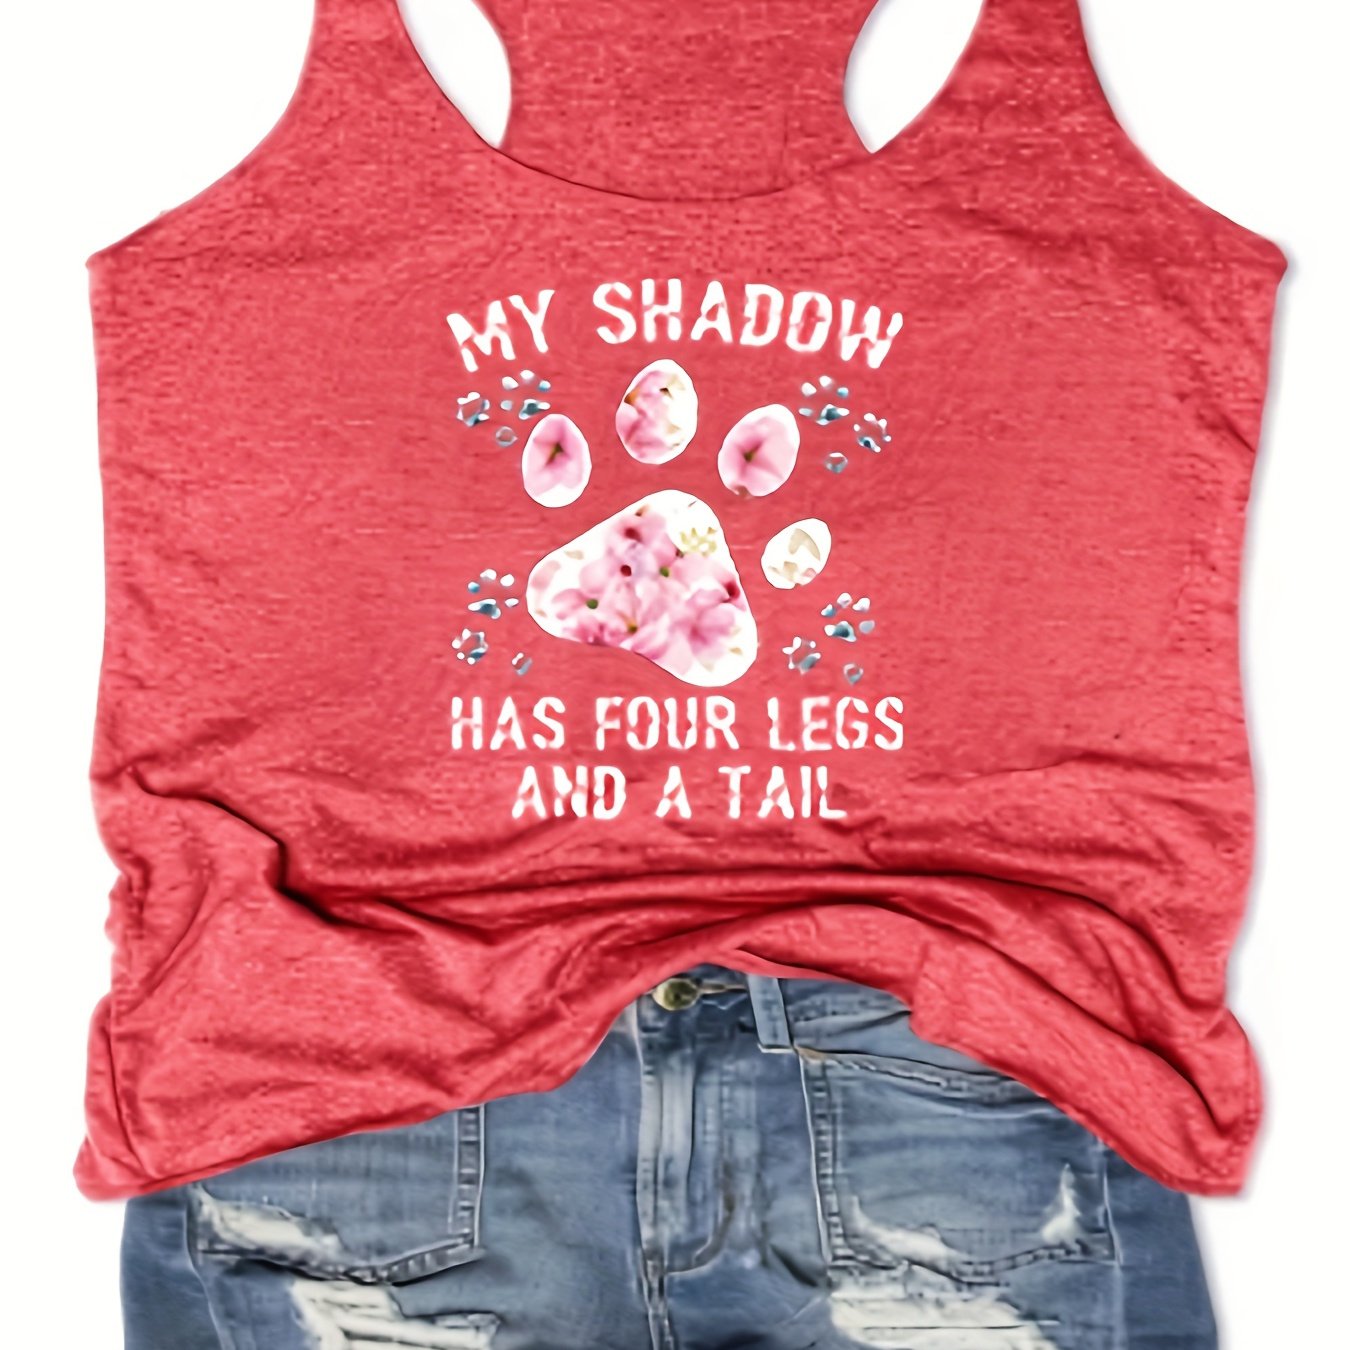 

Women's Fashion Sleeveless Top, Casual Slim Fit Printed Tank, With "my Shadow Has 4 Legs And A Tail" Graphic, Pet Lover Gift Idea, Soft Breathable Fabric